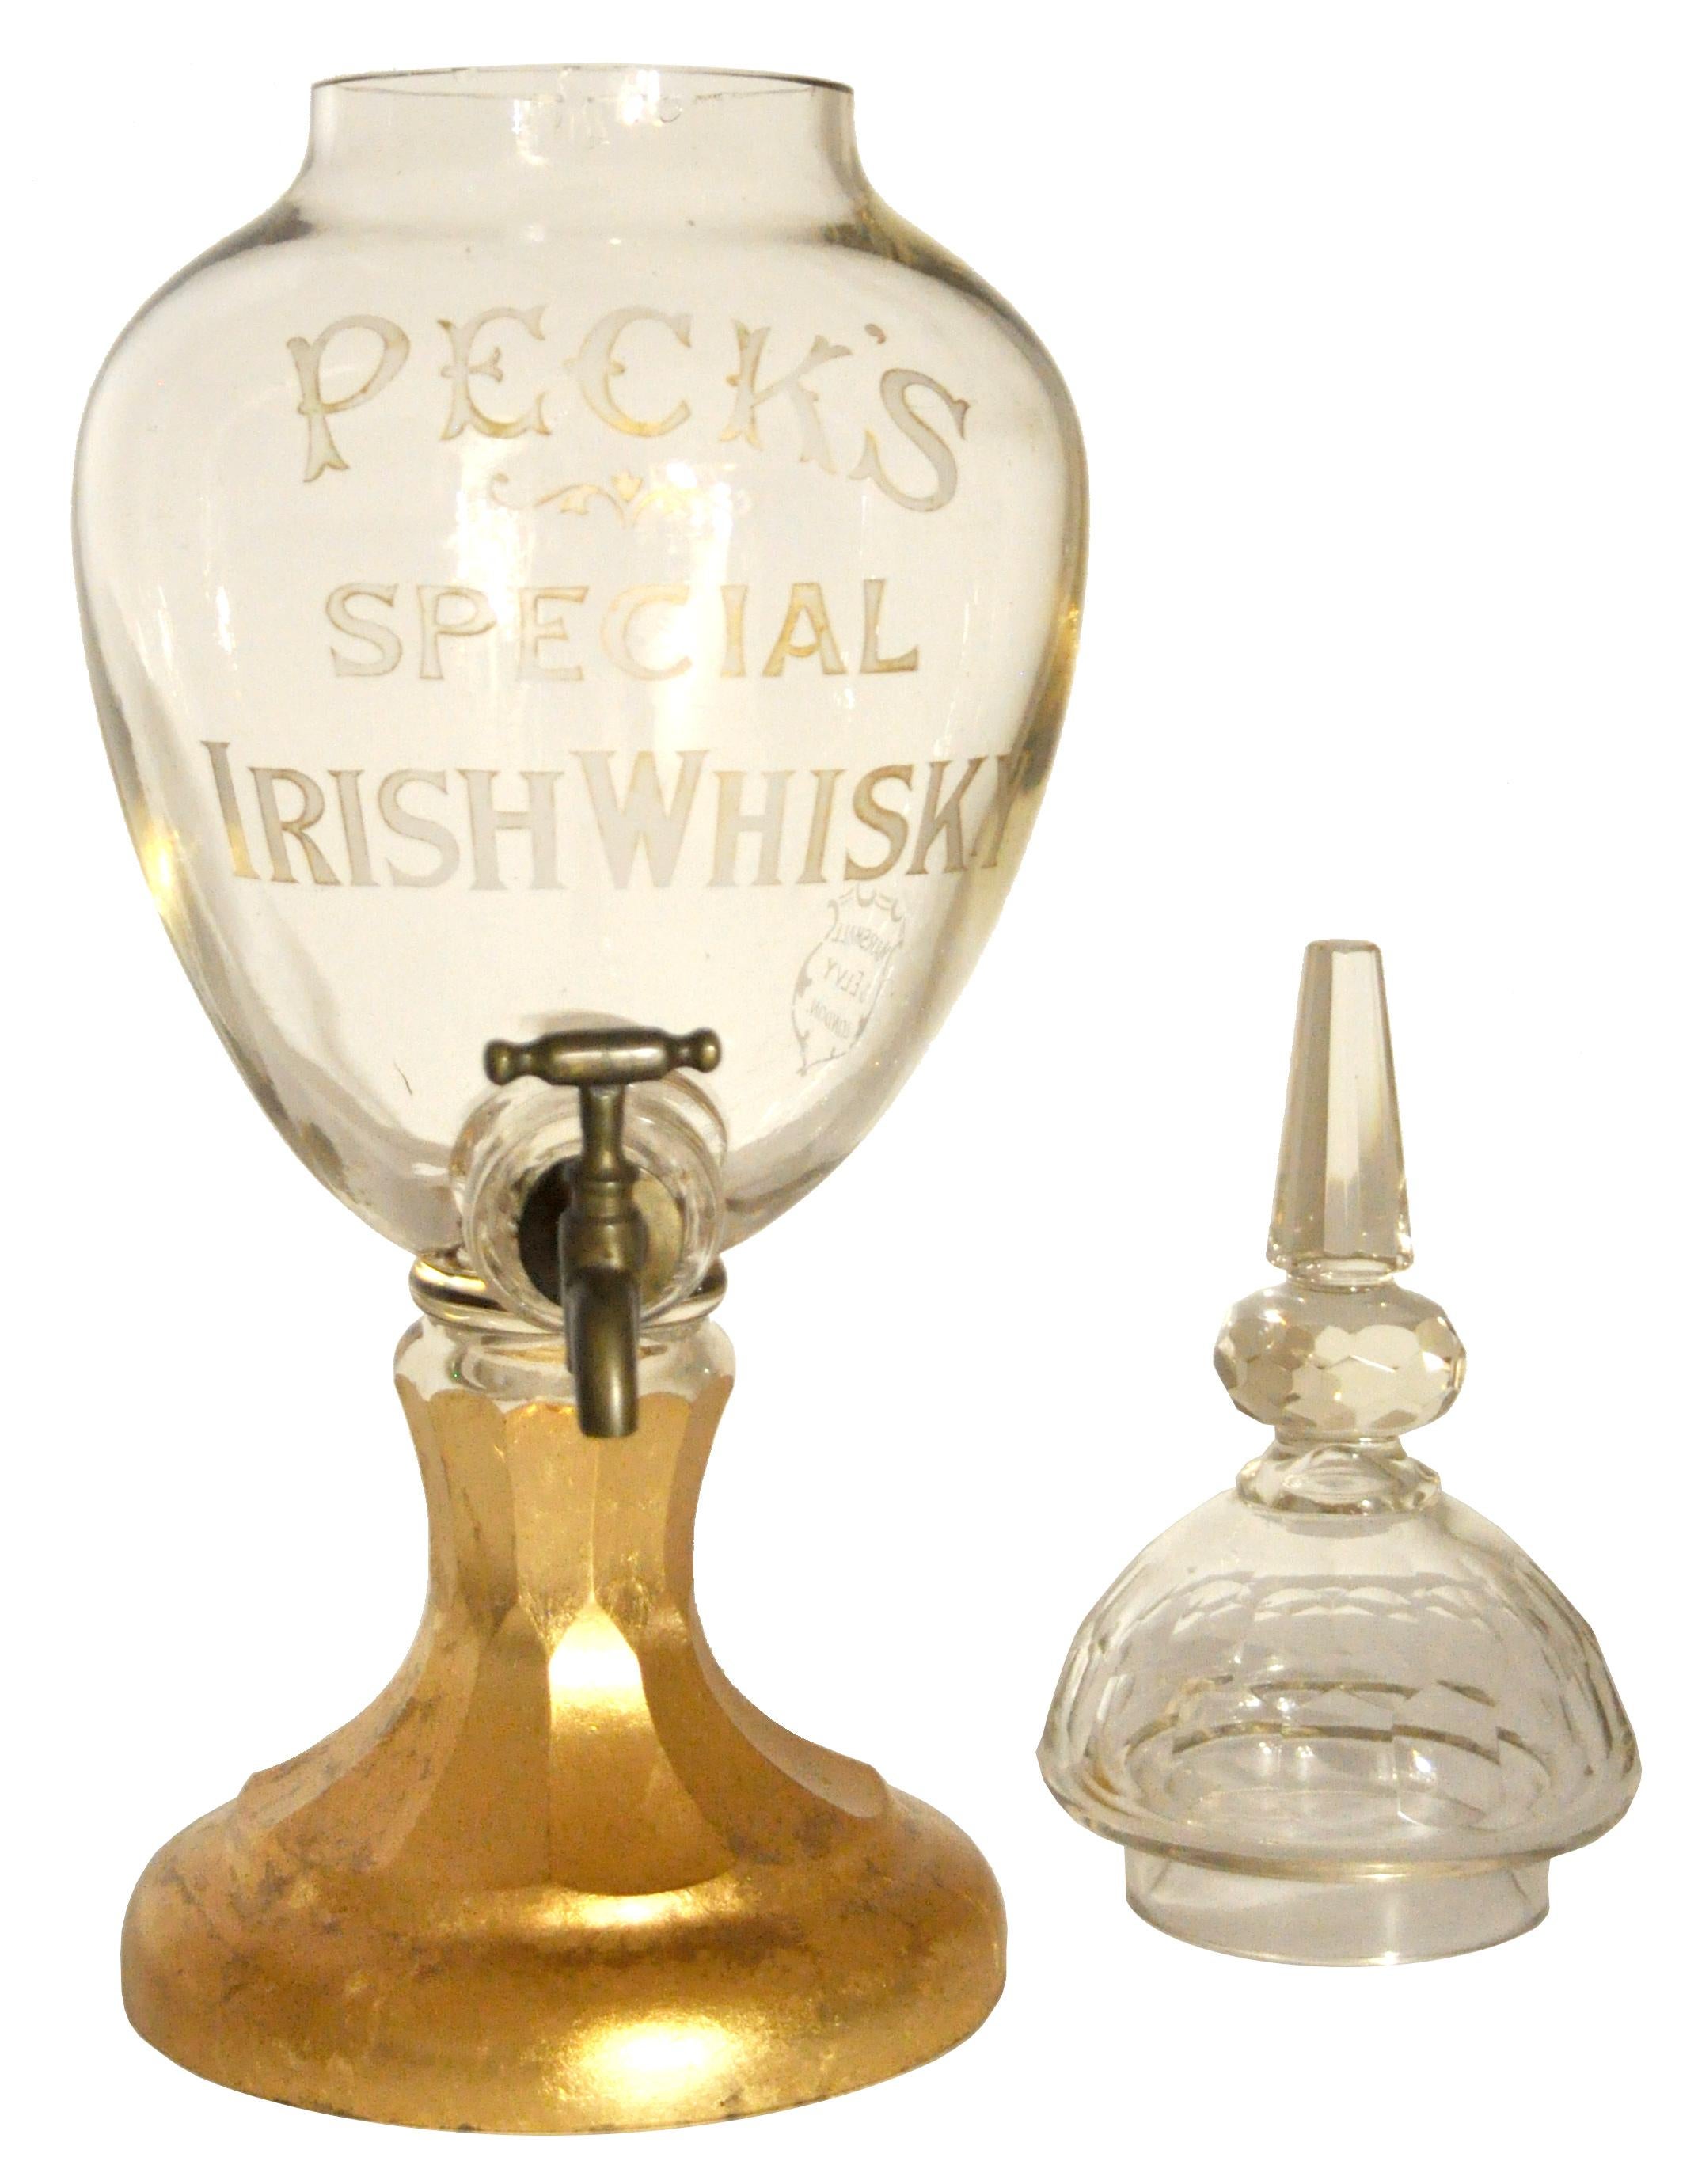 Late 19th Century Large Antique Cut Glass Crystal Peck's Irish Whisky Dispenser Decanter, 1870